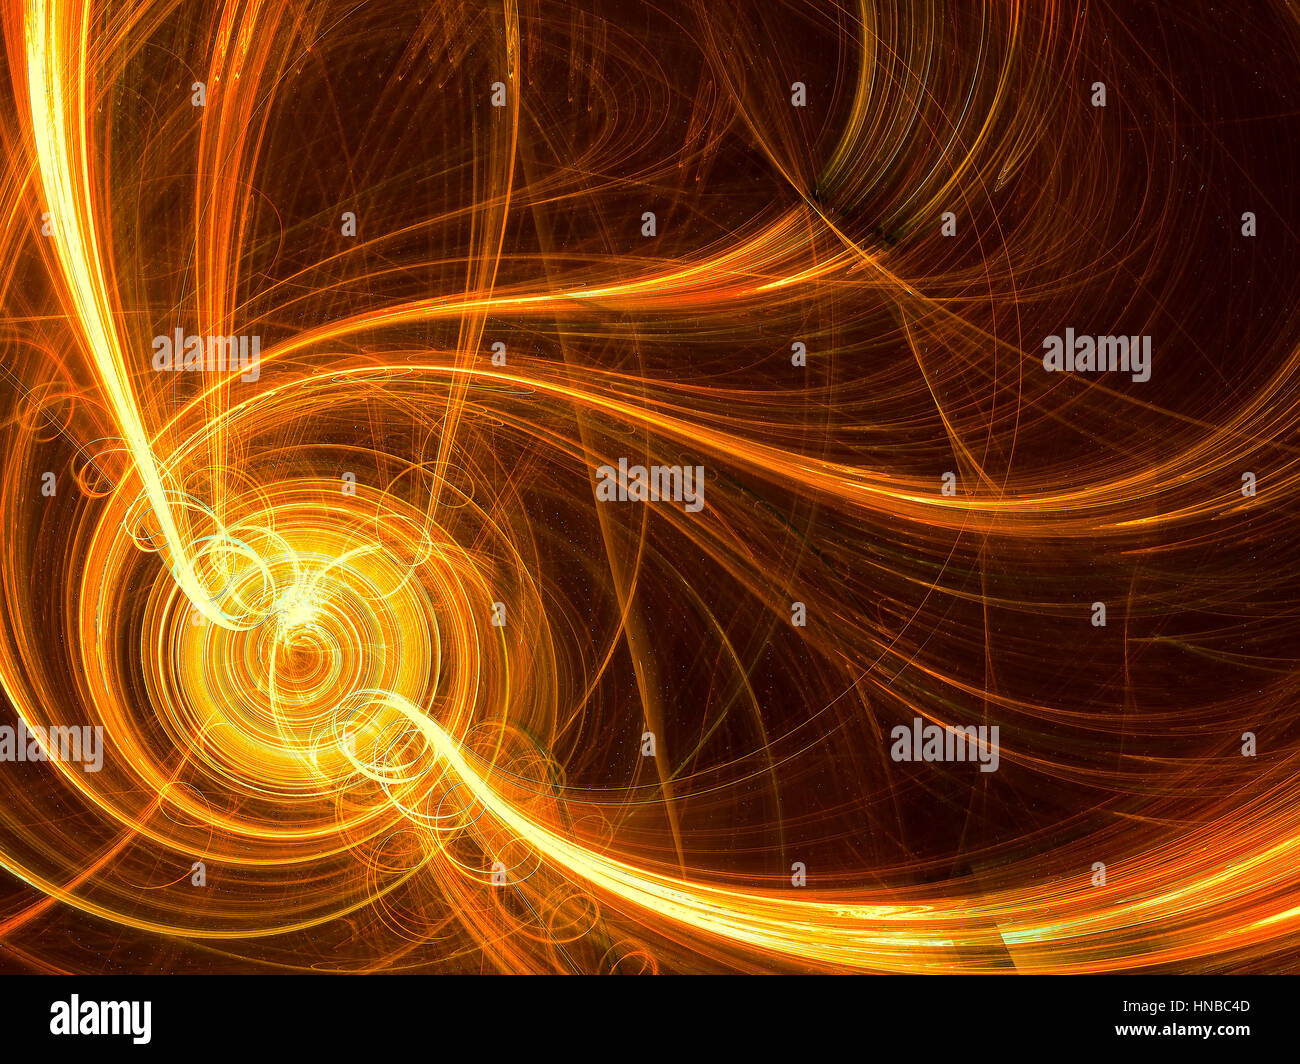 Fractal swirl - abstract digitally generated image Stock Photo